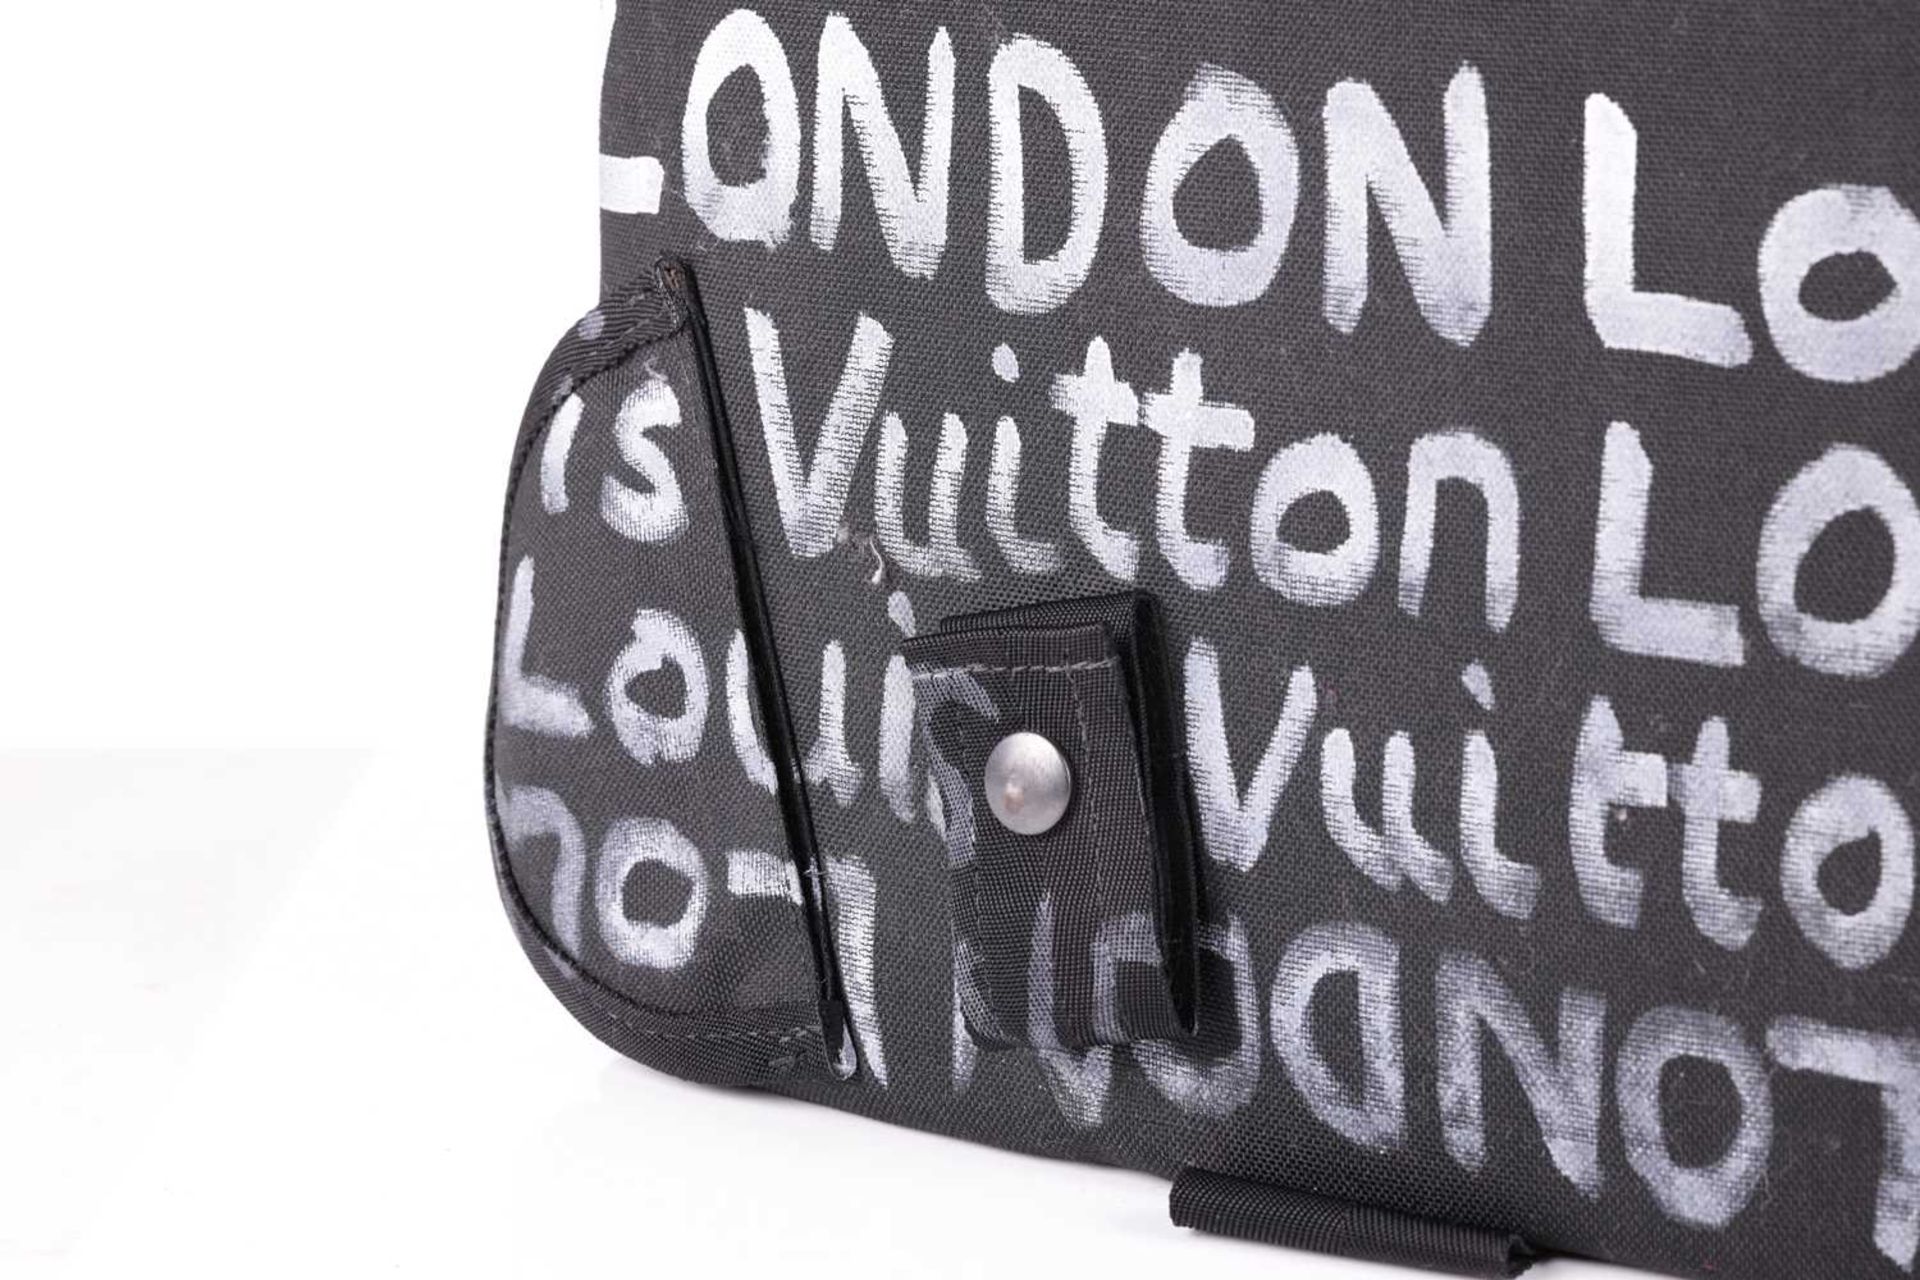 War Boutique (b. 1965), 'Louis Vuitton London', initialled, dated '19 and numbered 1/1 on interior - Image 6 of 9